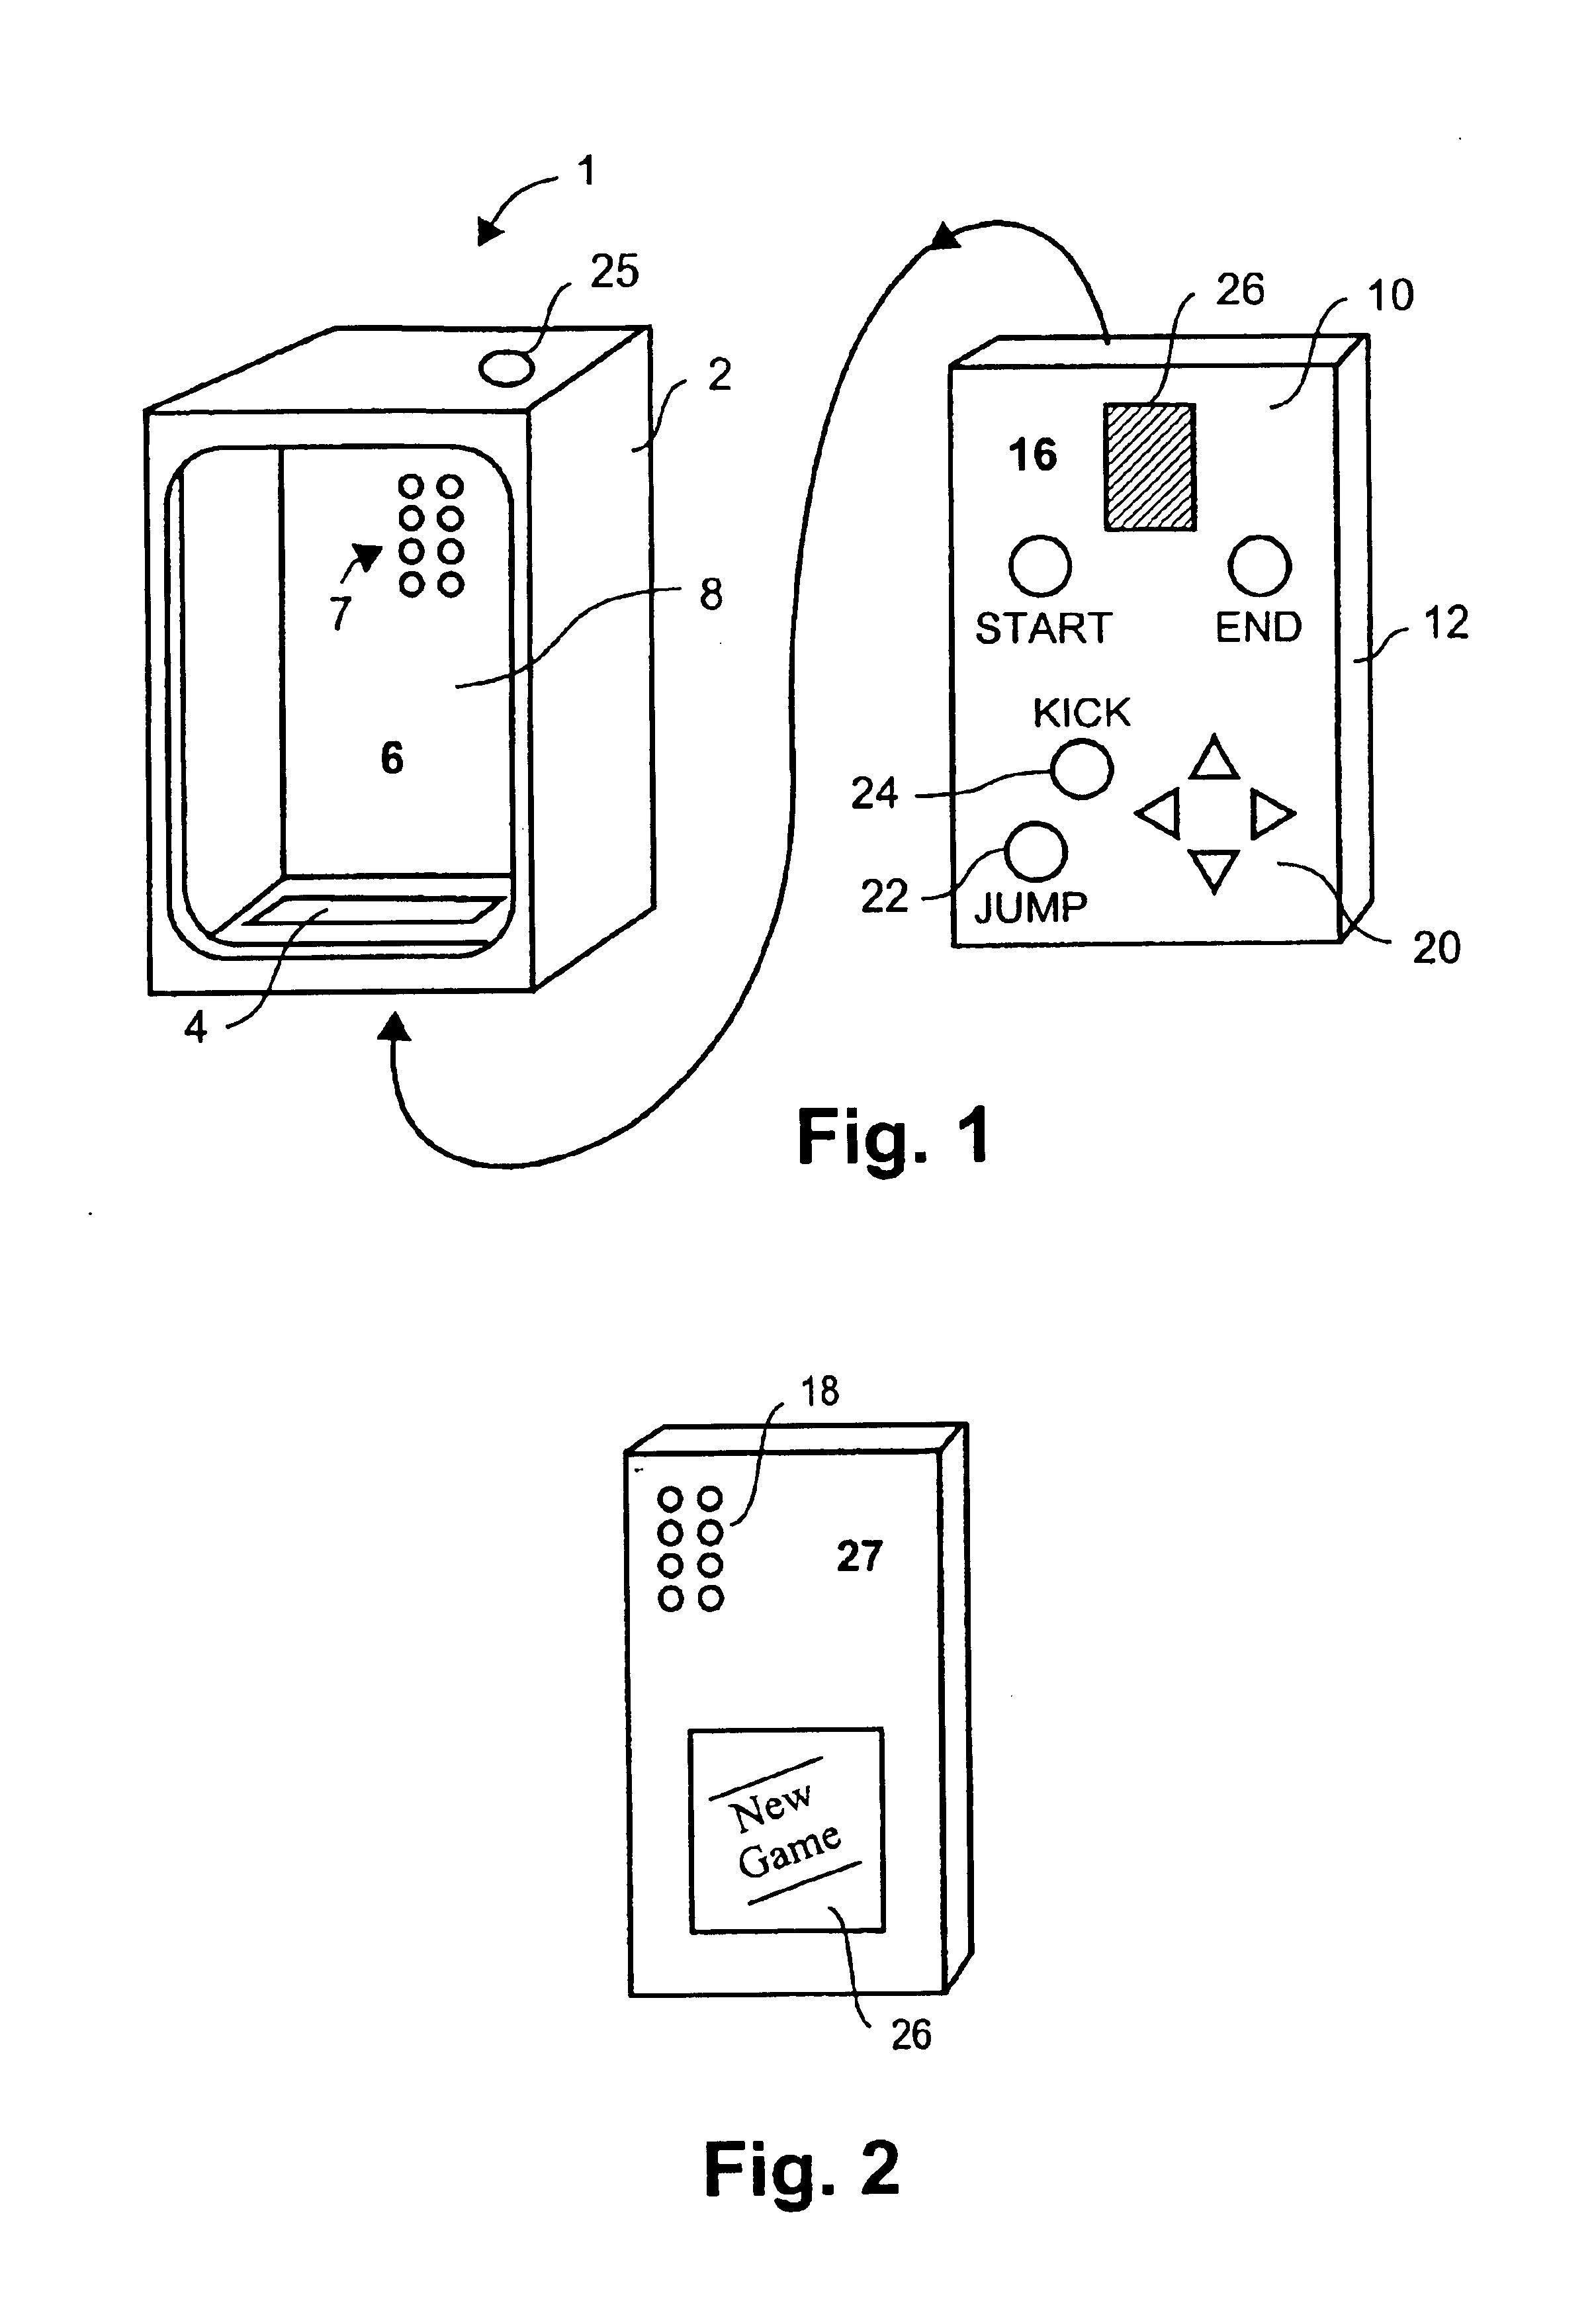 User programmable smart card interface system for an image album